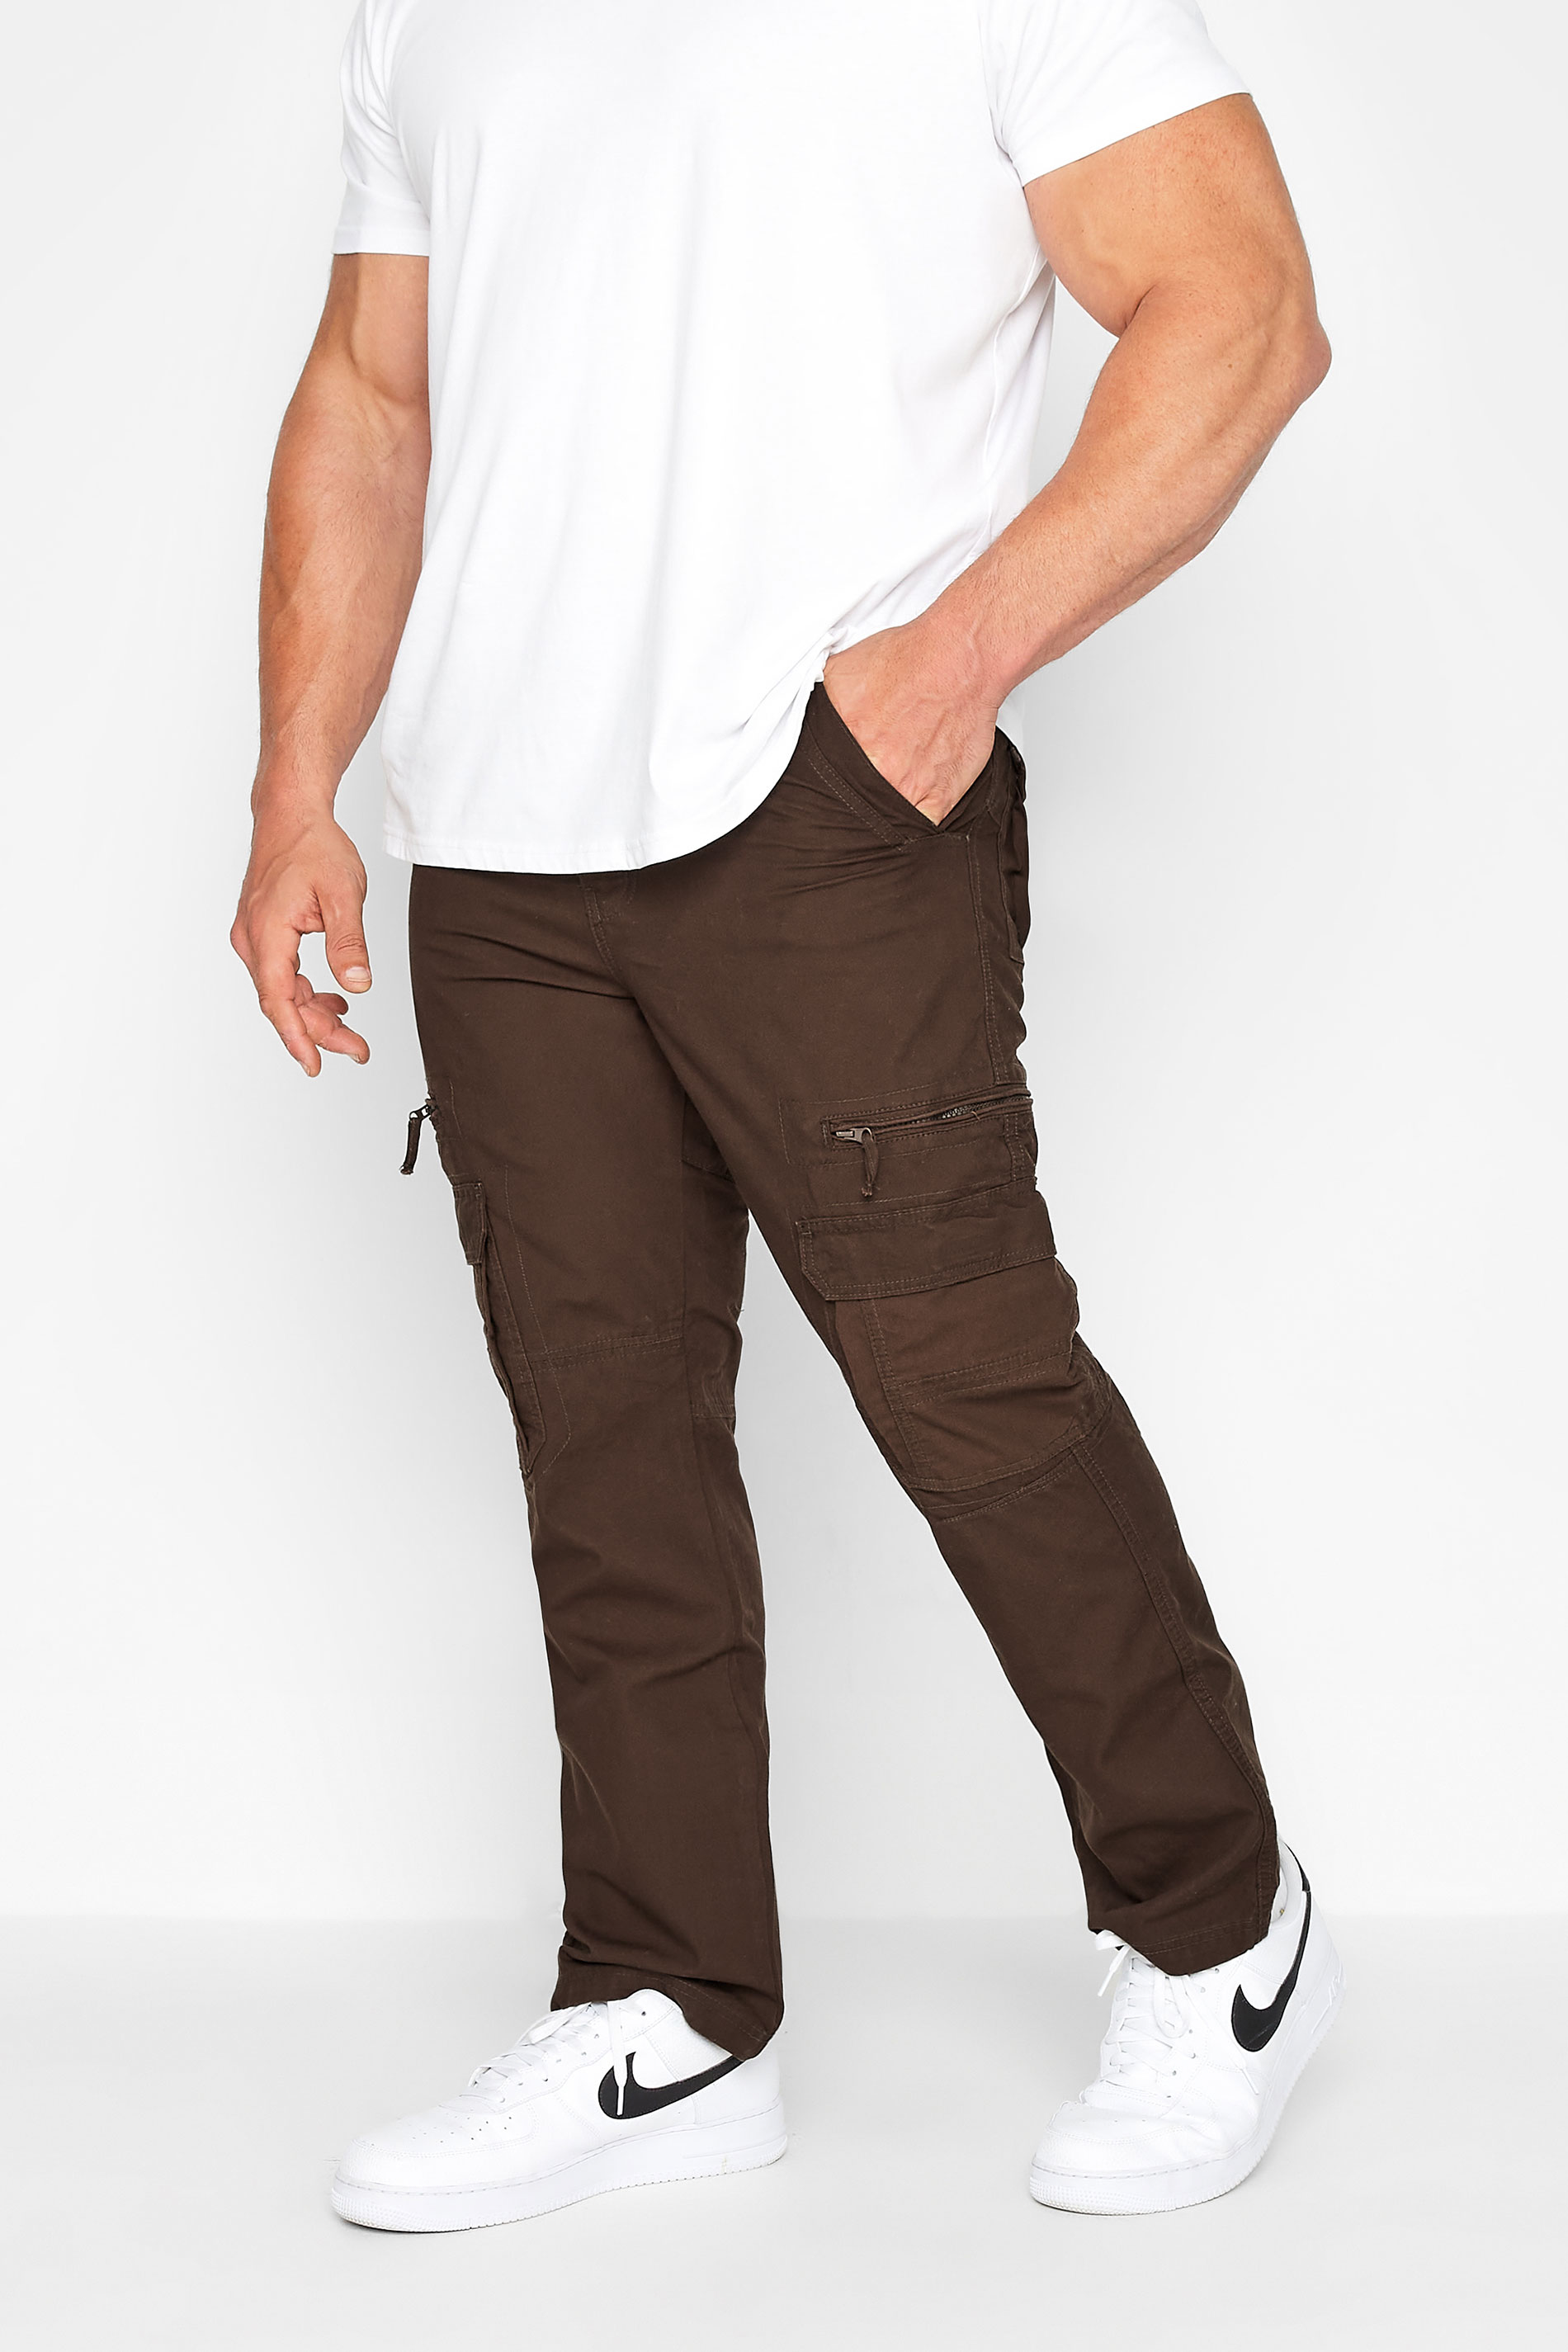 Image of Inside Leg Size 30", Waist Size 40 Mens Kam Big & Tall Brown Cargo Trousers Big & Tall